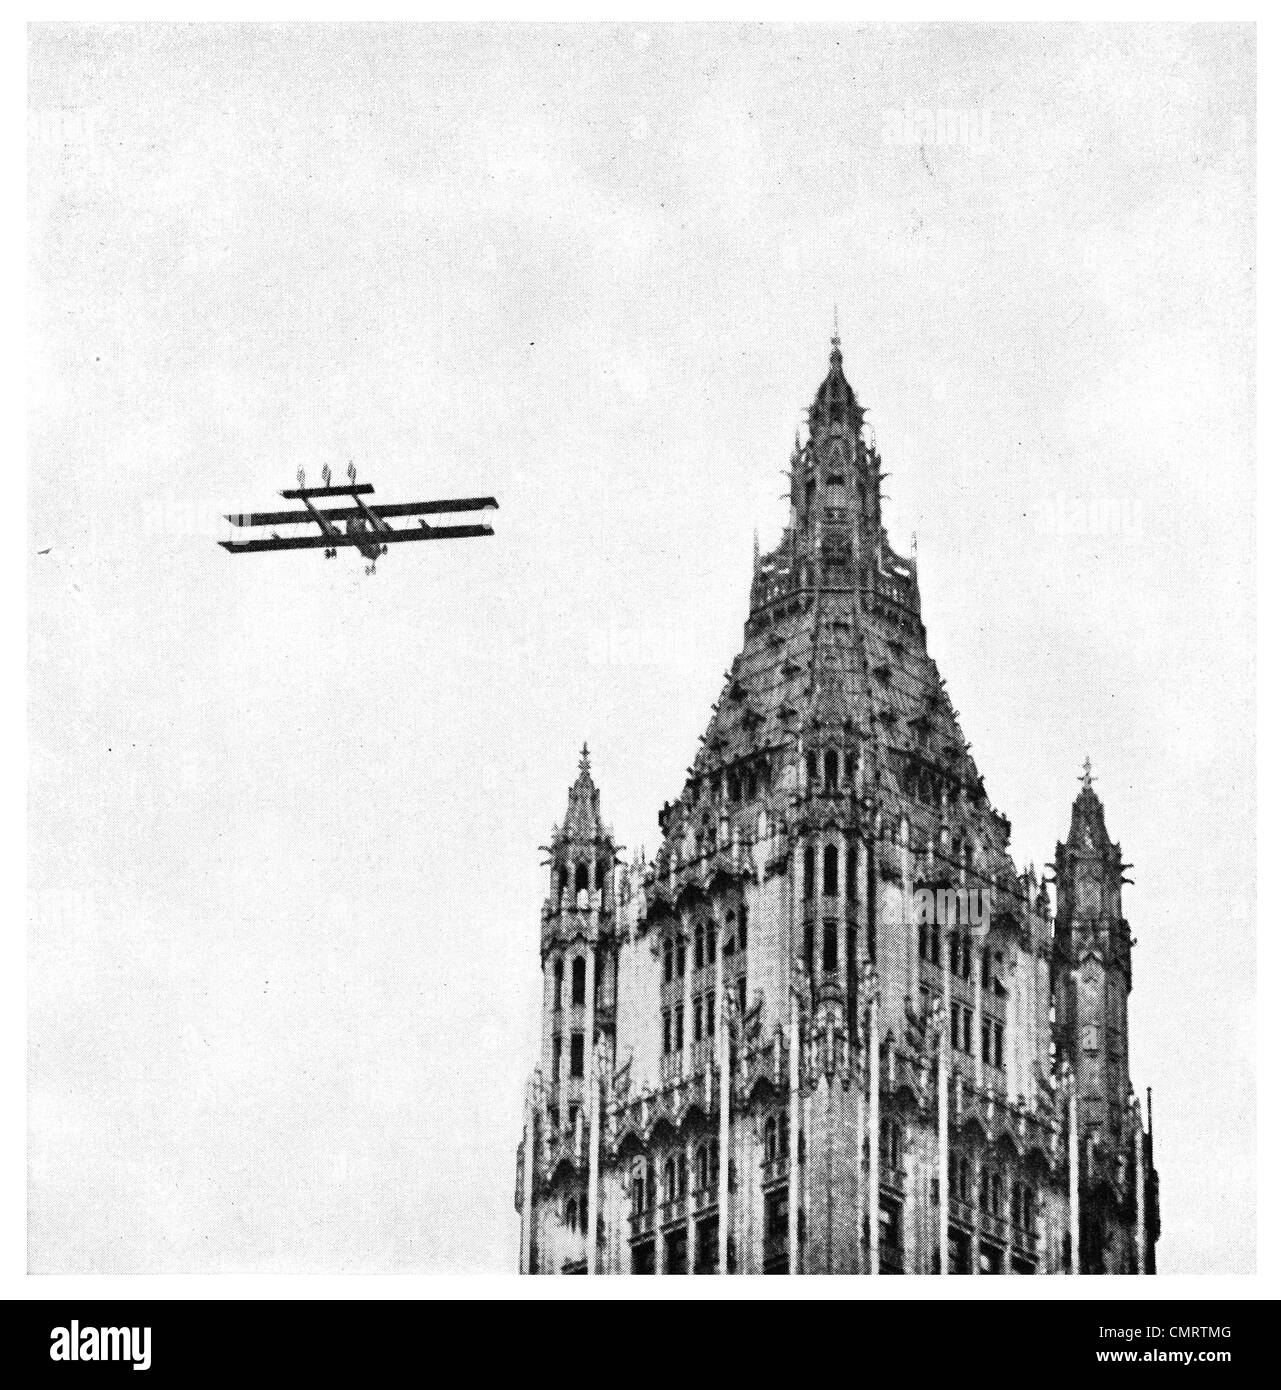 1918 Grand biplan Caproni battant Woolworth Tower New York Banque D'Images